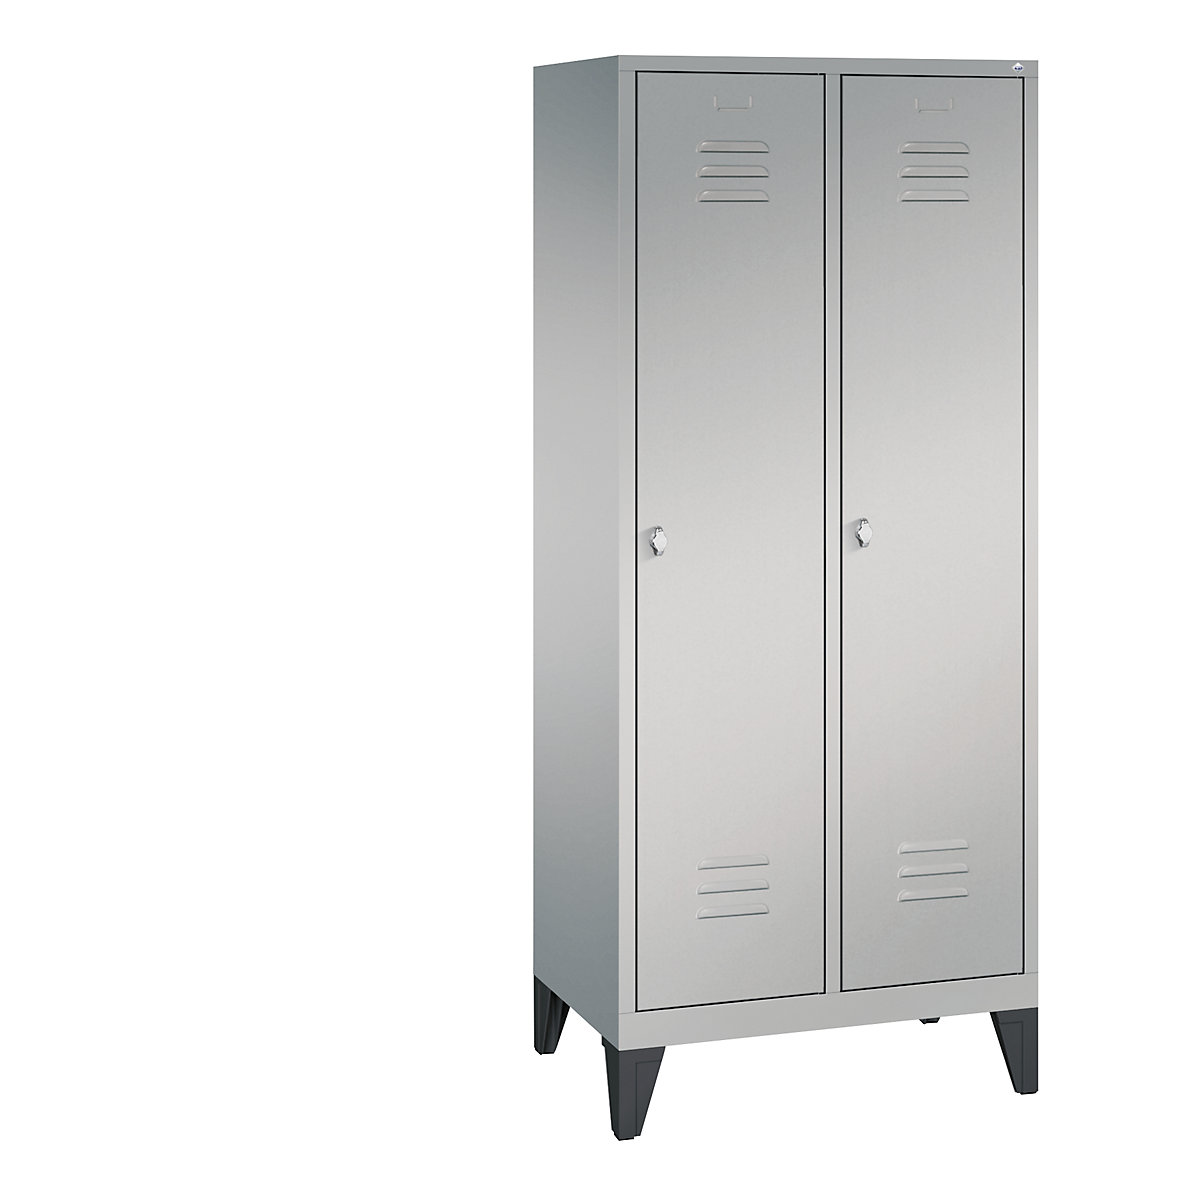 CLASSIC cloakroom locker with feet – C+P, 2 compartments, compartment width 400 mm, white aluminium-13